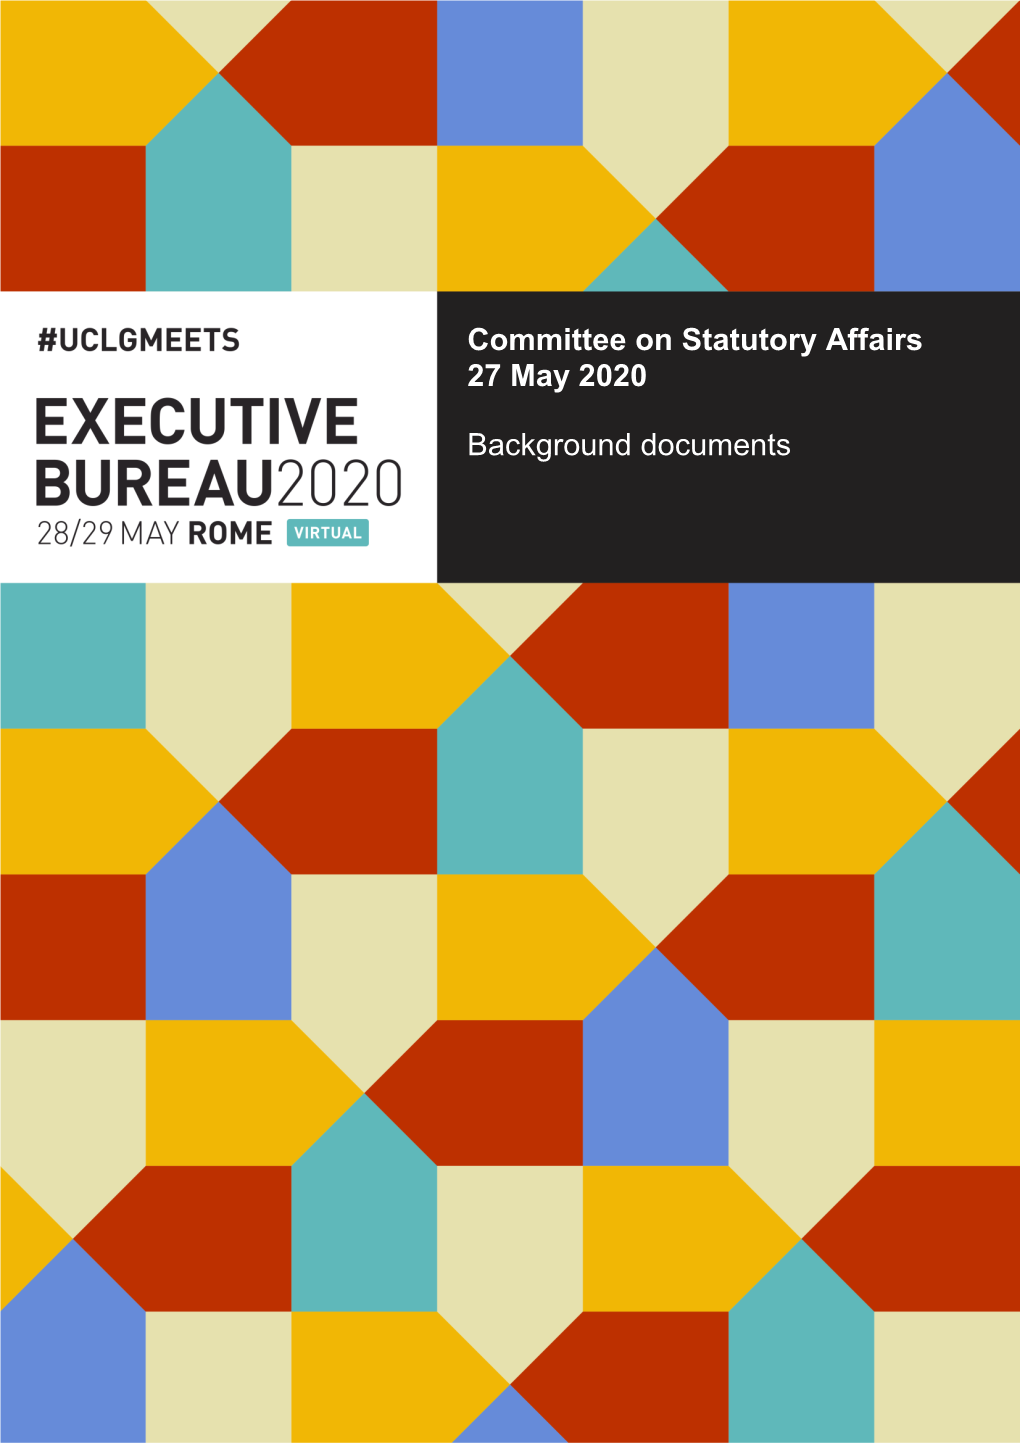 Committee on Statutory Affairs 27 May 2020 Background Documents